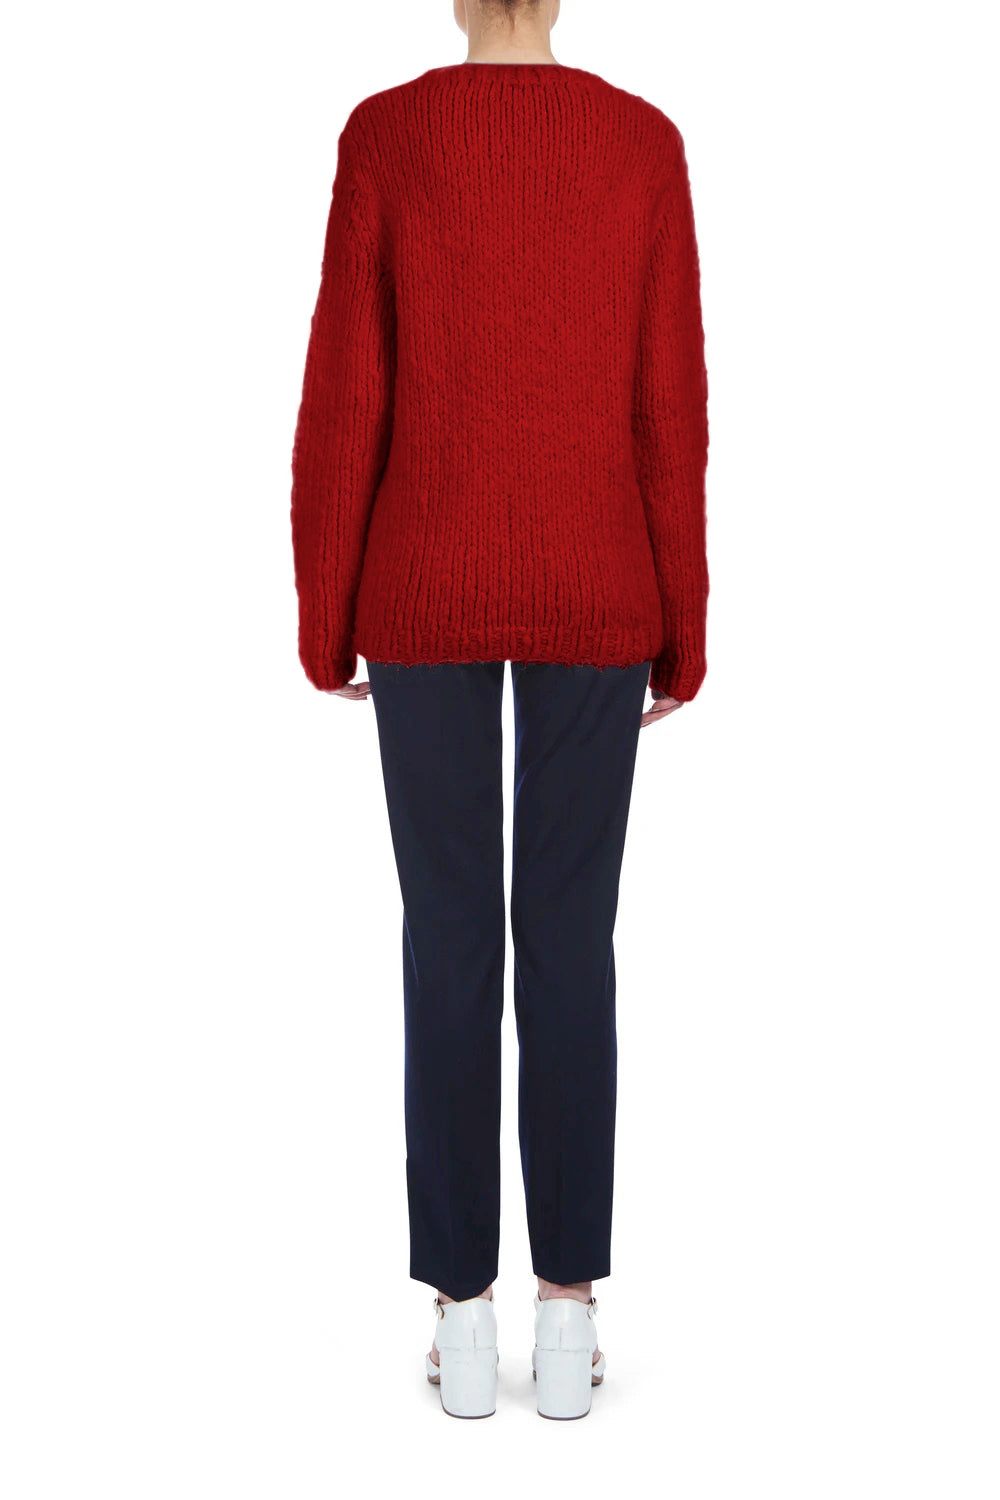 Lawrence Knit Sweater in Red Welfat Cashmere